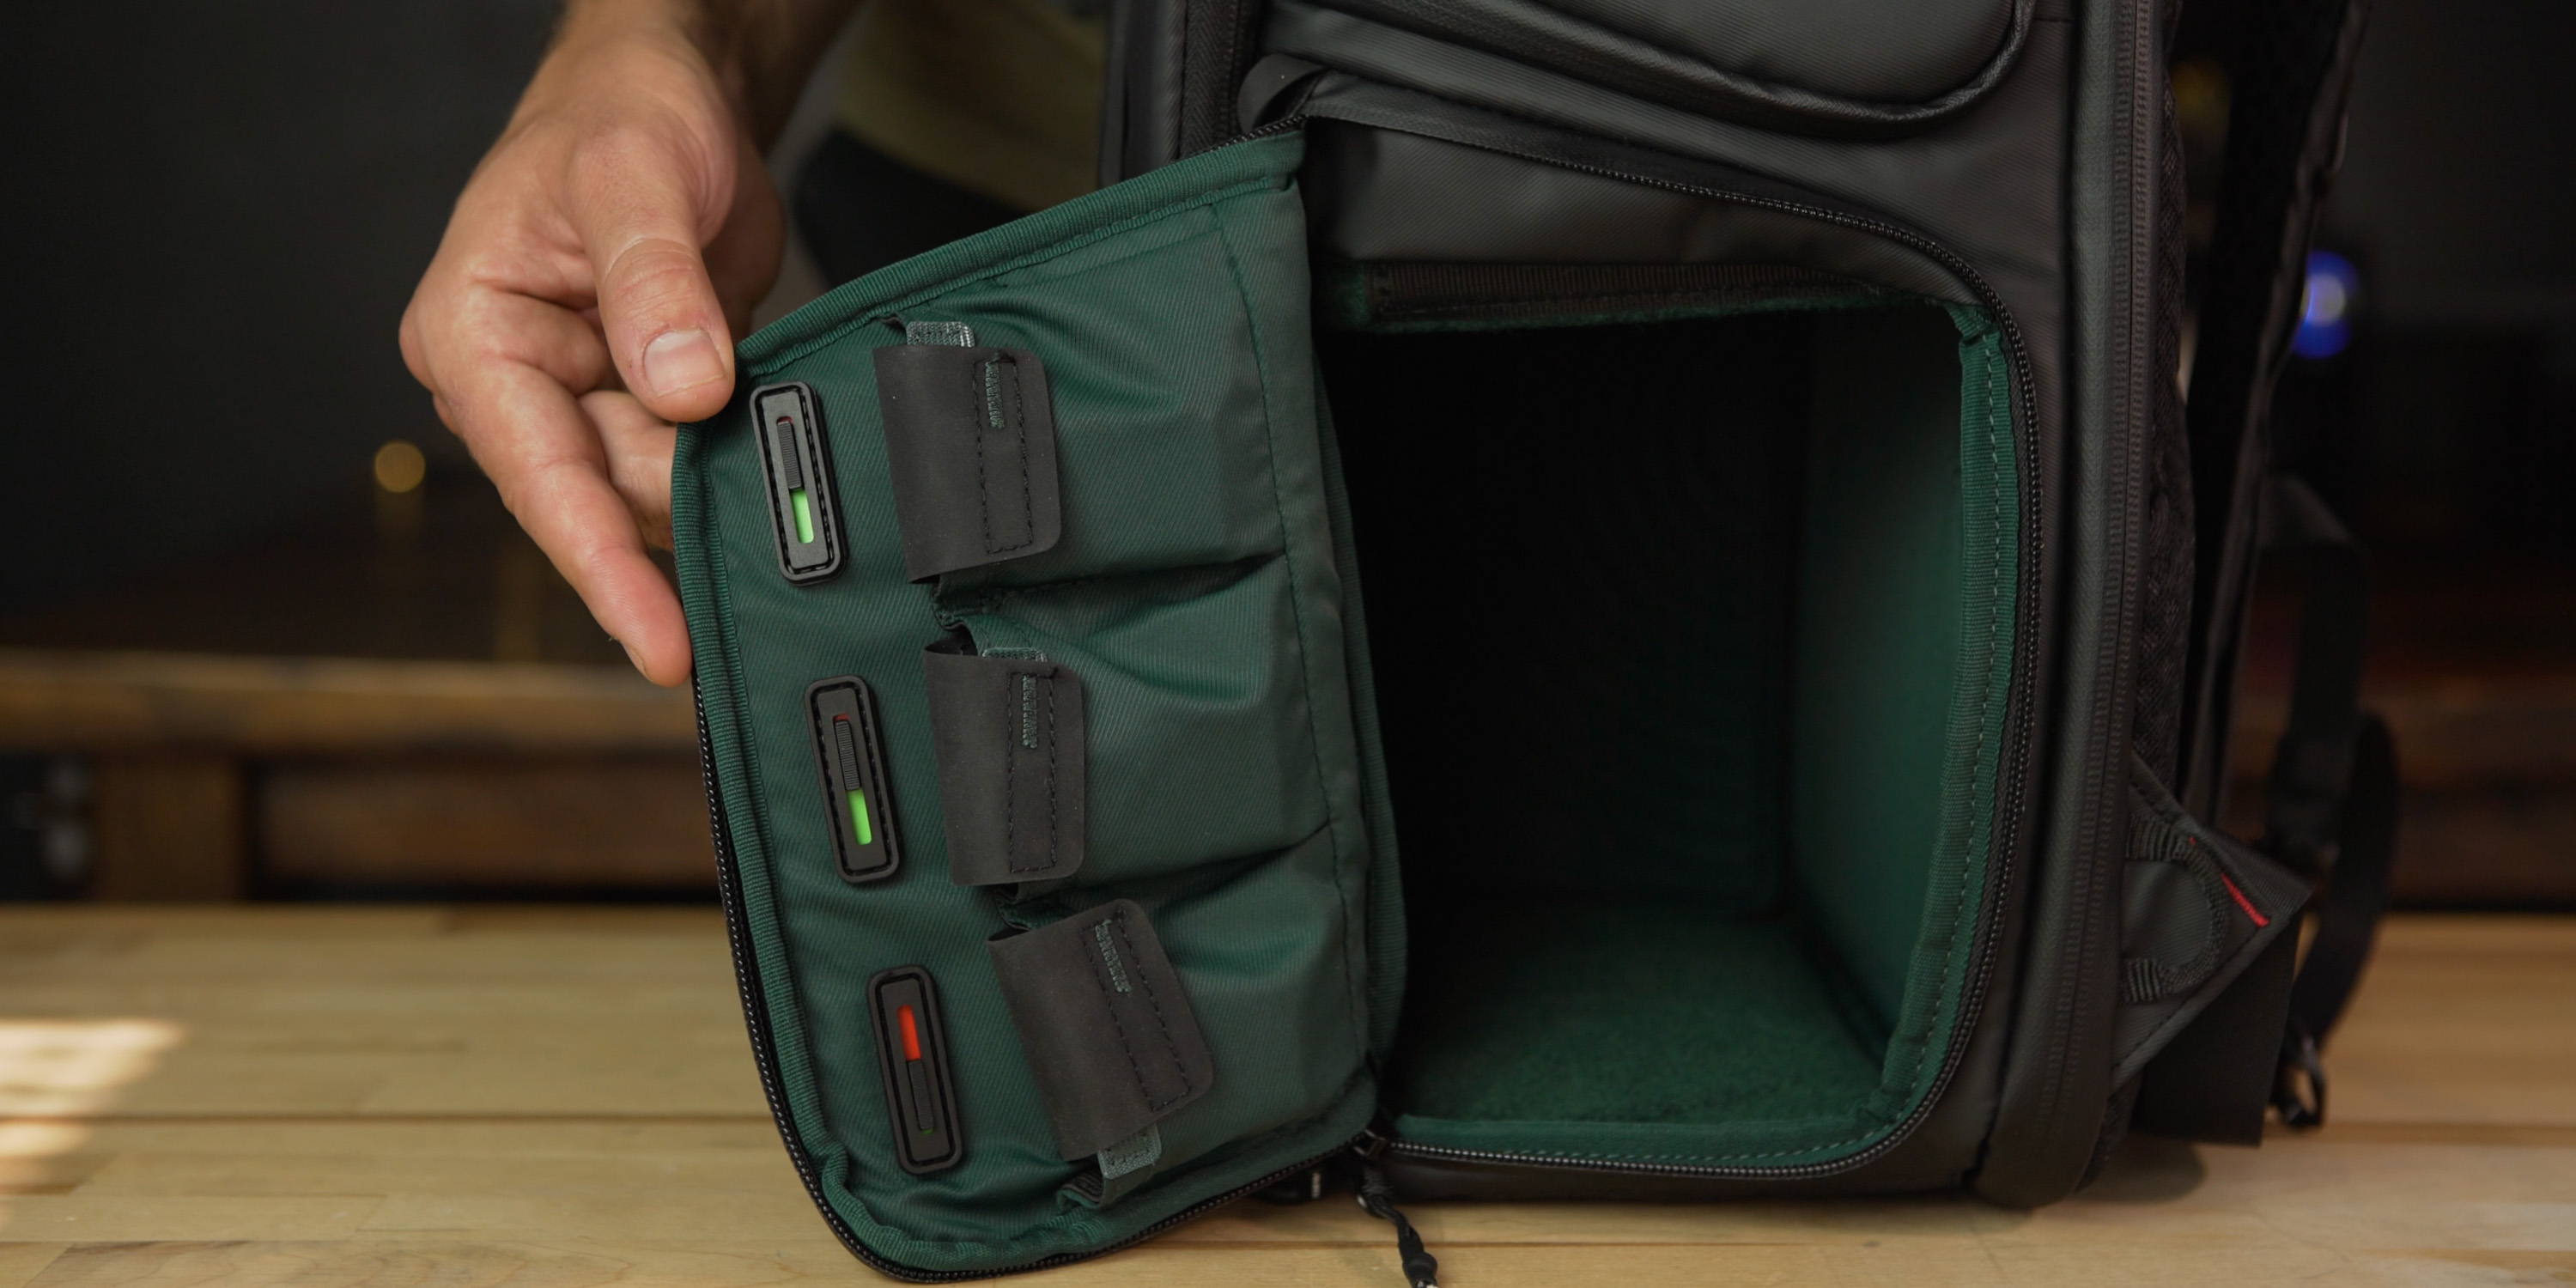 Dedicated battery pouches with charge indicators on the OneMo camera bag